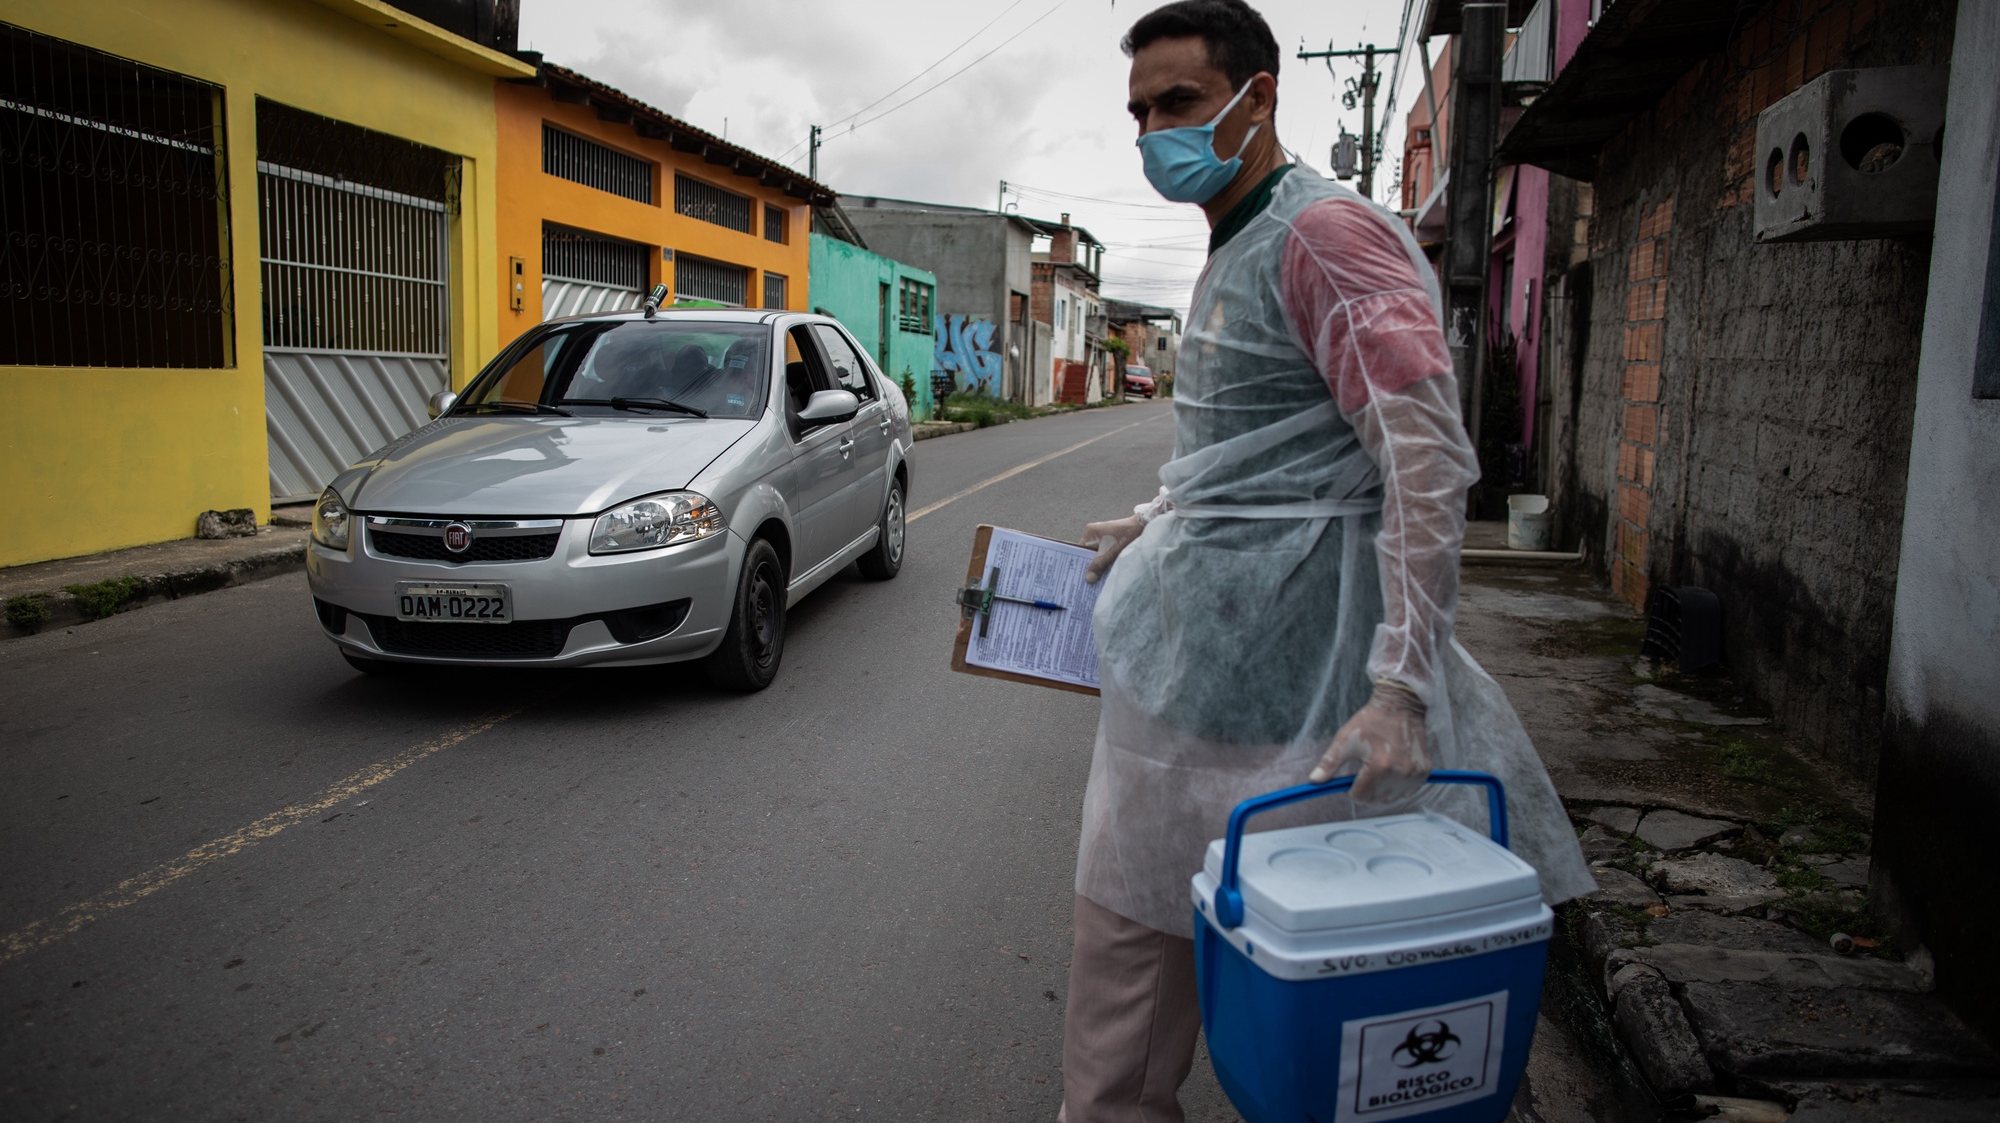 epa08942471 A professional from the Center for Issuing Death Certificates (CEDO) of the Municipal Health Secretariat goes to a residence to take the covid-19 test of a man who died at home, in Manaus, Amazonas, Brazil, 15 January 2021 (issued 16 January 2021). More than a thousand people have been buried during the last week in Manaus, the city of the Brazilian Amazon collapsed by the pandemic, where the number of dead in homes begins to grow, as families queue to get a certificate that allows them to be buried. To help cope with the situation, a team of obituary and pathology technicians visit the homes where deaths from covid symptoms have been registered to expedite the death certificate.  EPA/RAPHAEL ALVES